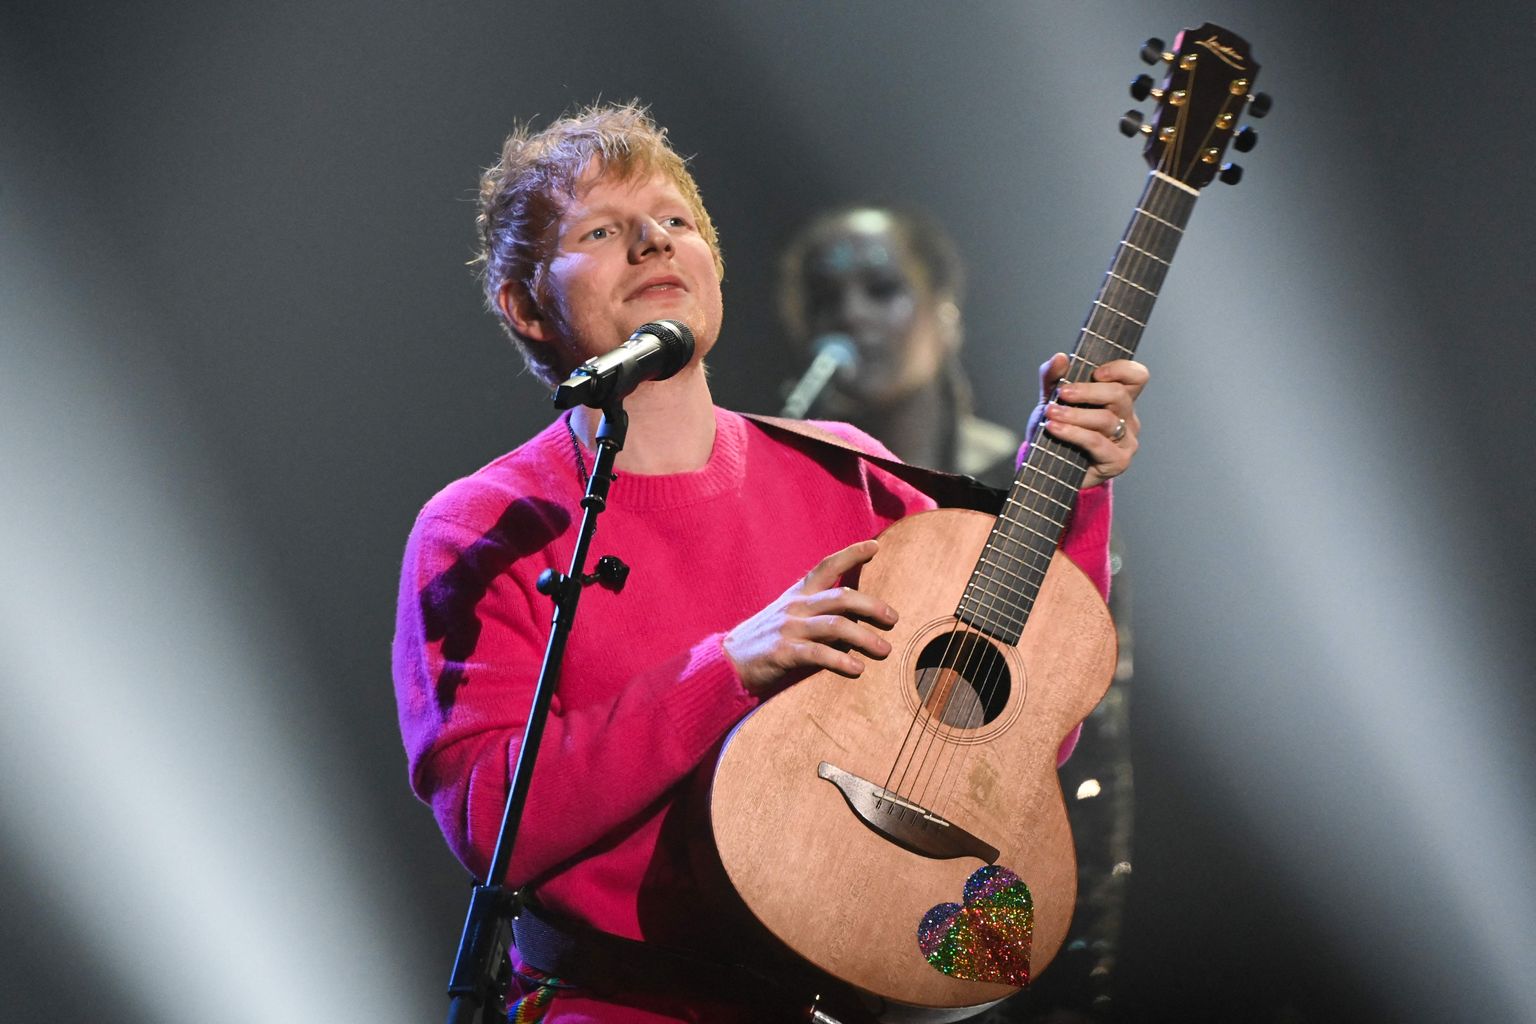 English singer-songwriter Ed Sheeran performs on stage during the MTV Europe Music Awards at the Laszlo Papp Budapest Sports Arena in Budapest, Hungary on November 14, 2021. (Photo by Attila KISBENEDEK / AFP)